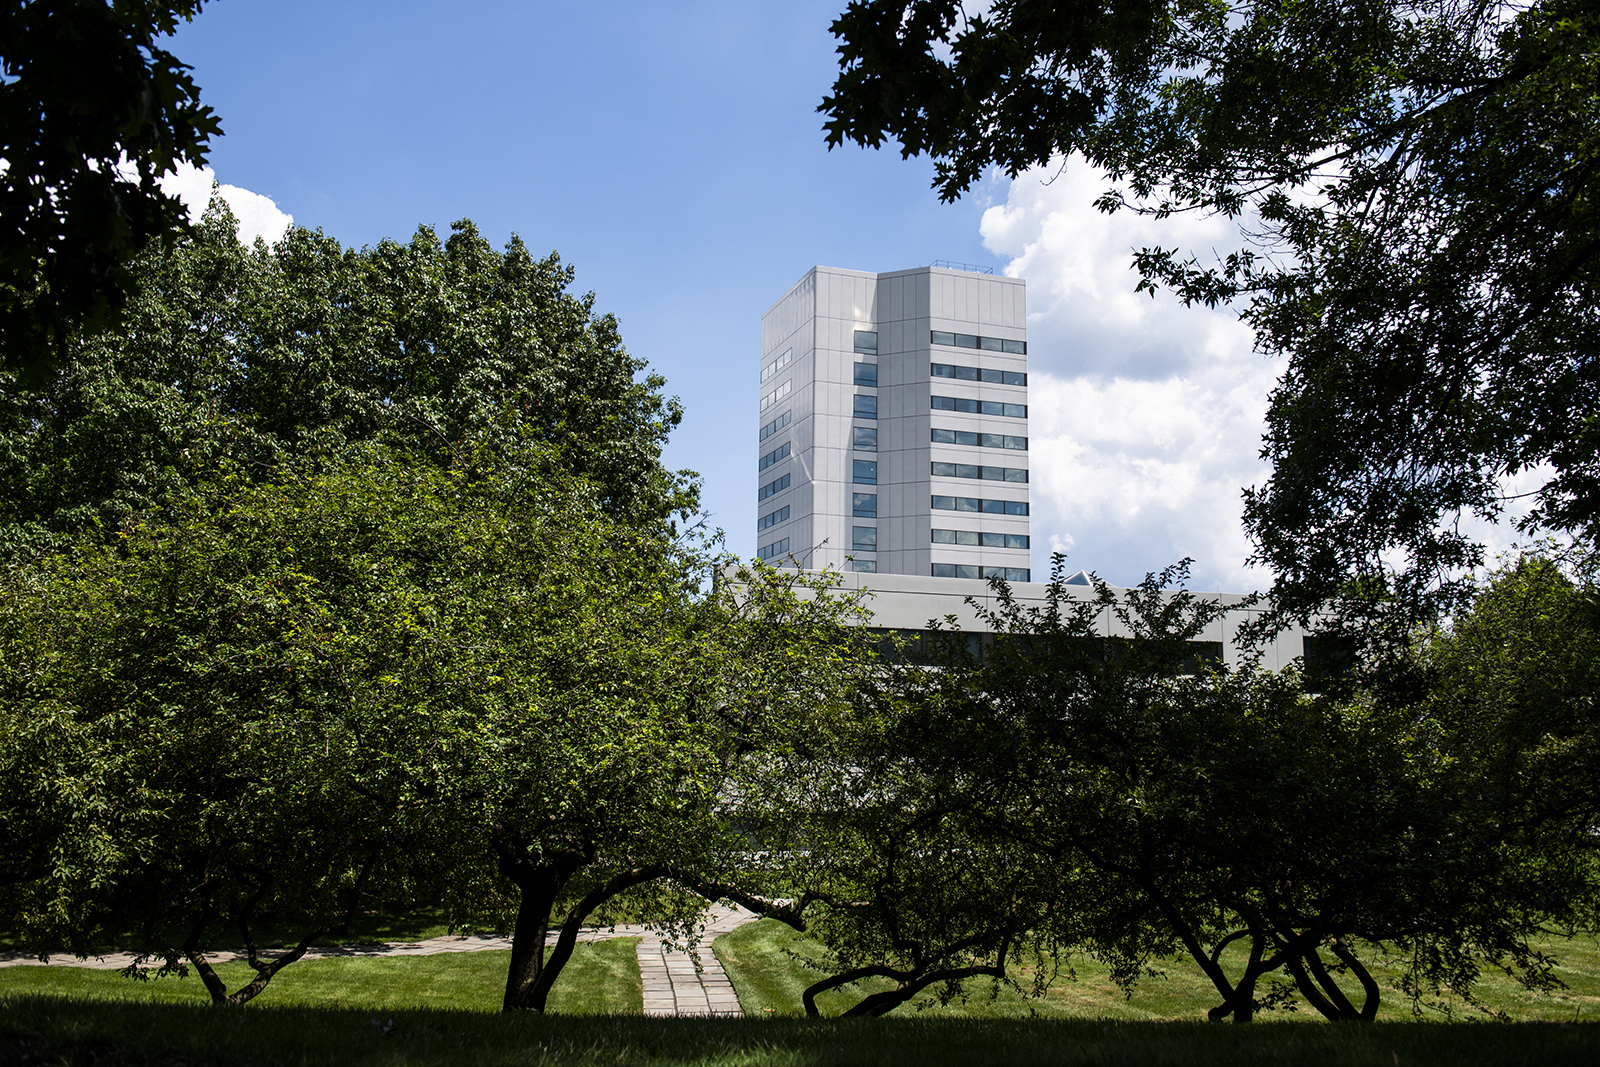 Johnson & Johnson headquarters stands in New Brunswick, New Jersey, on Saturday, August 1.